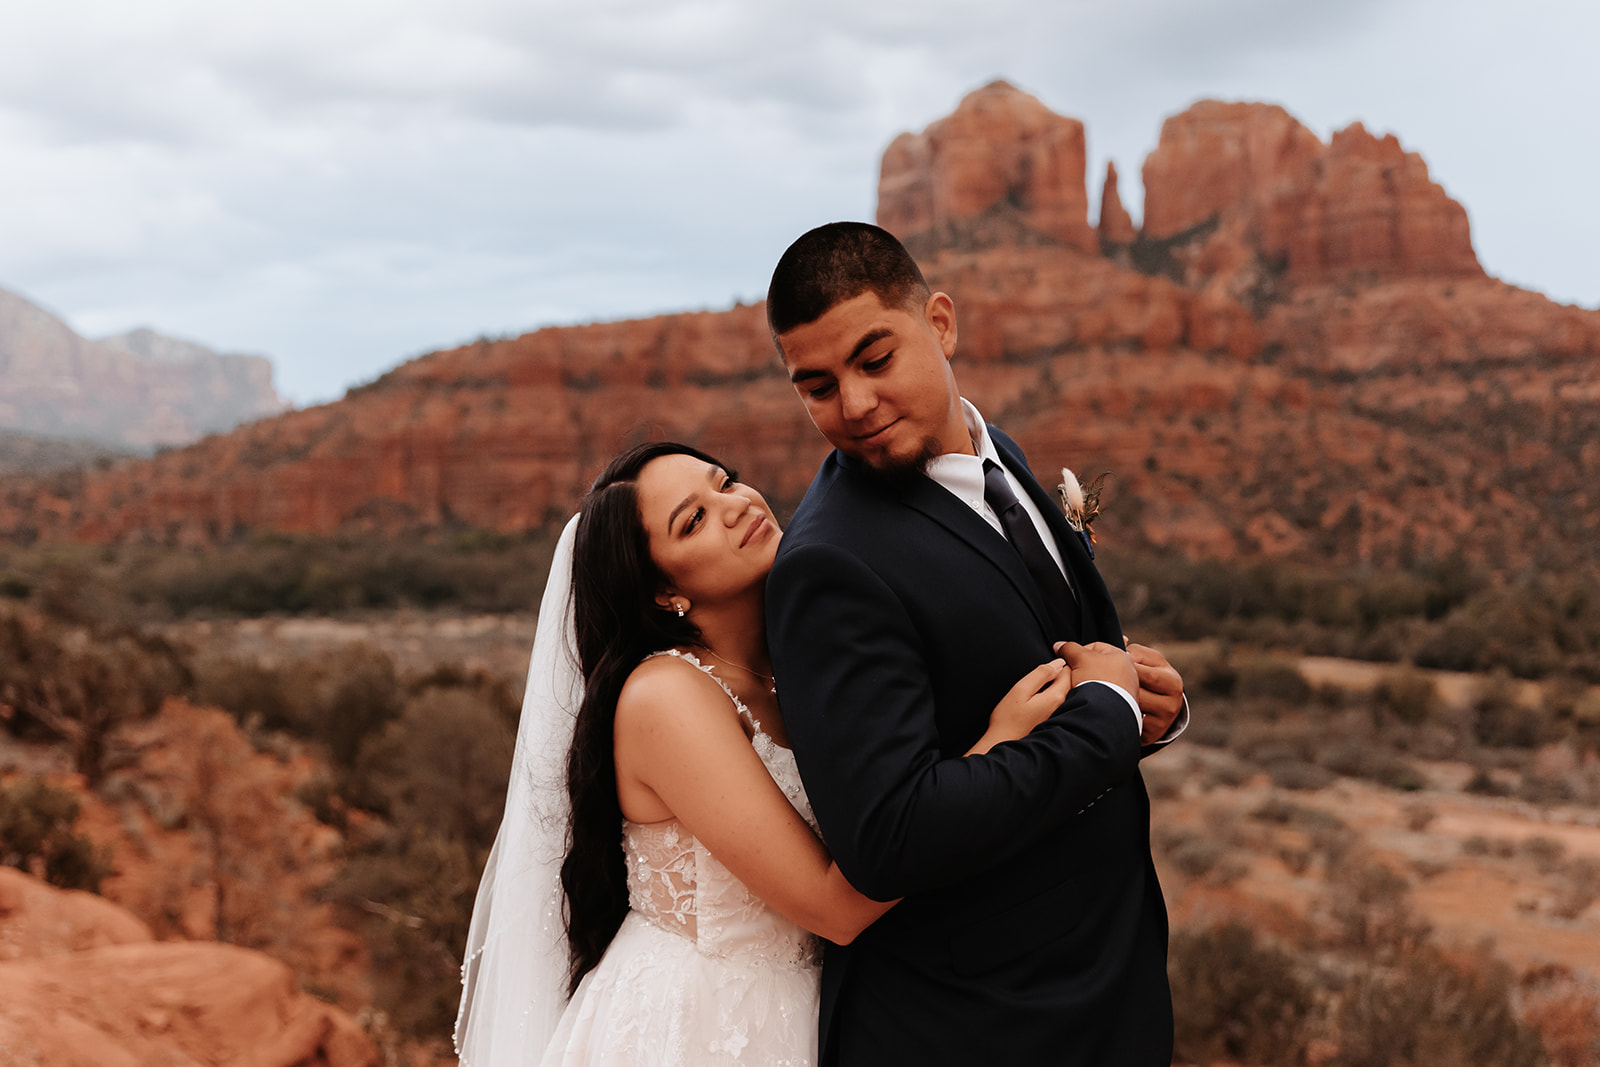 A couple who eloped in sedona pose for portraits